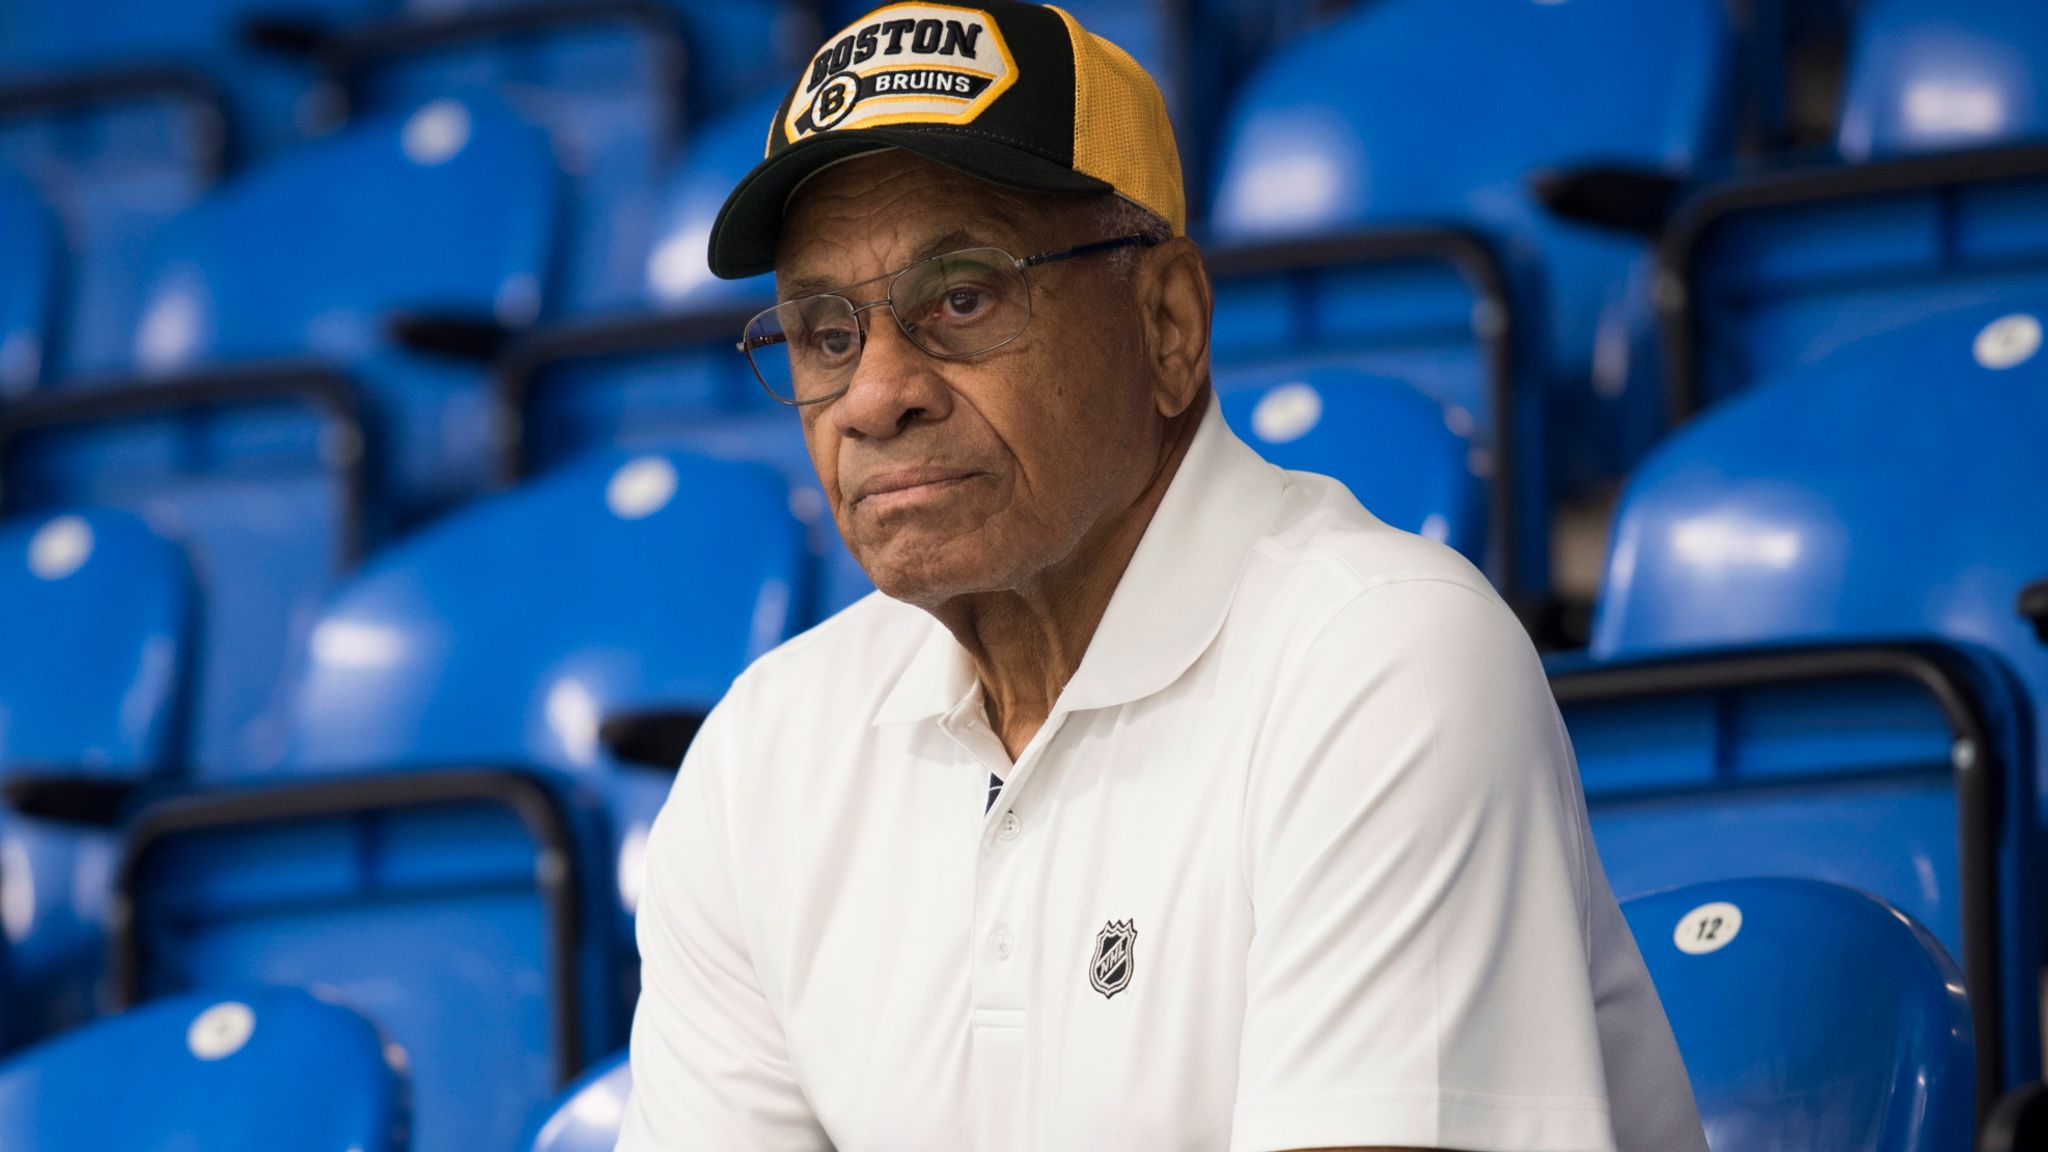 How former Bruins winger Willie O'Ree kept his vision impairment a